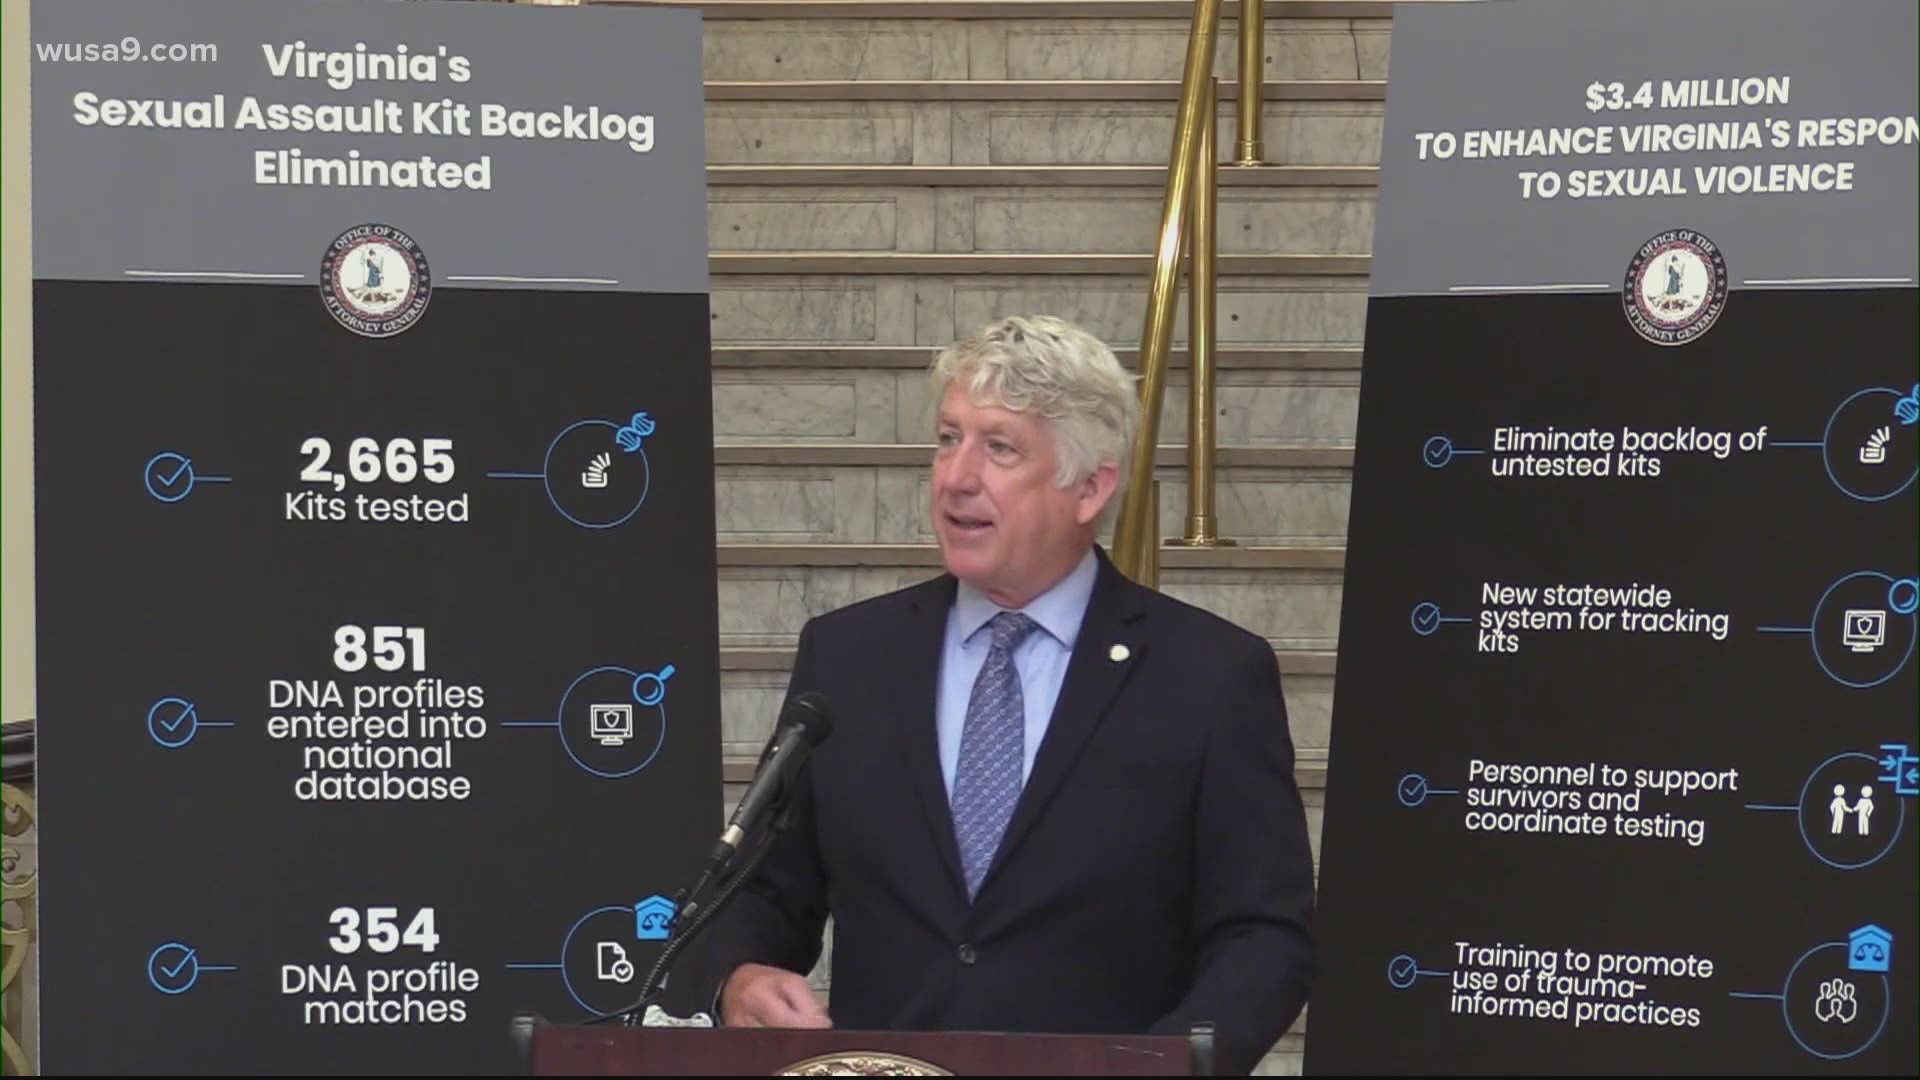 Attorney General Mark Herring called the project a mammoth undertaking.